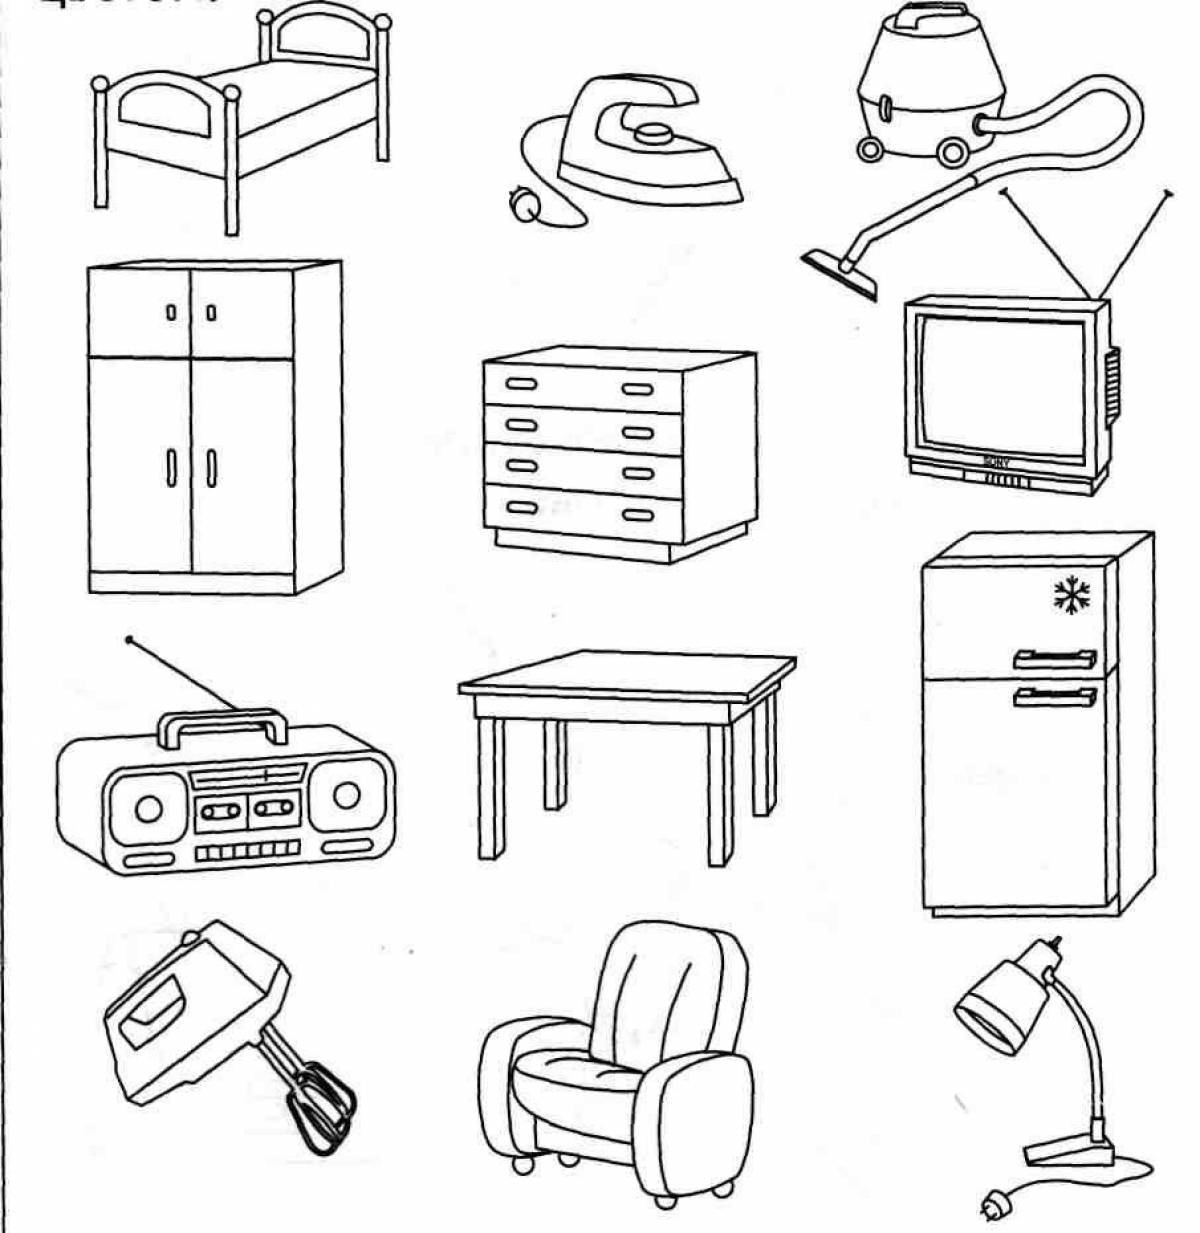 Coloring bright household appliances